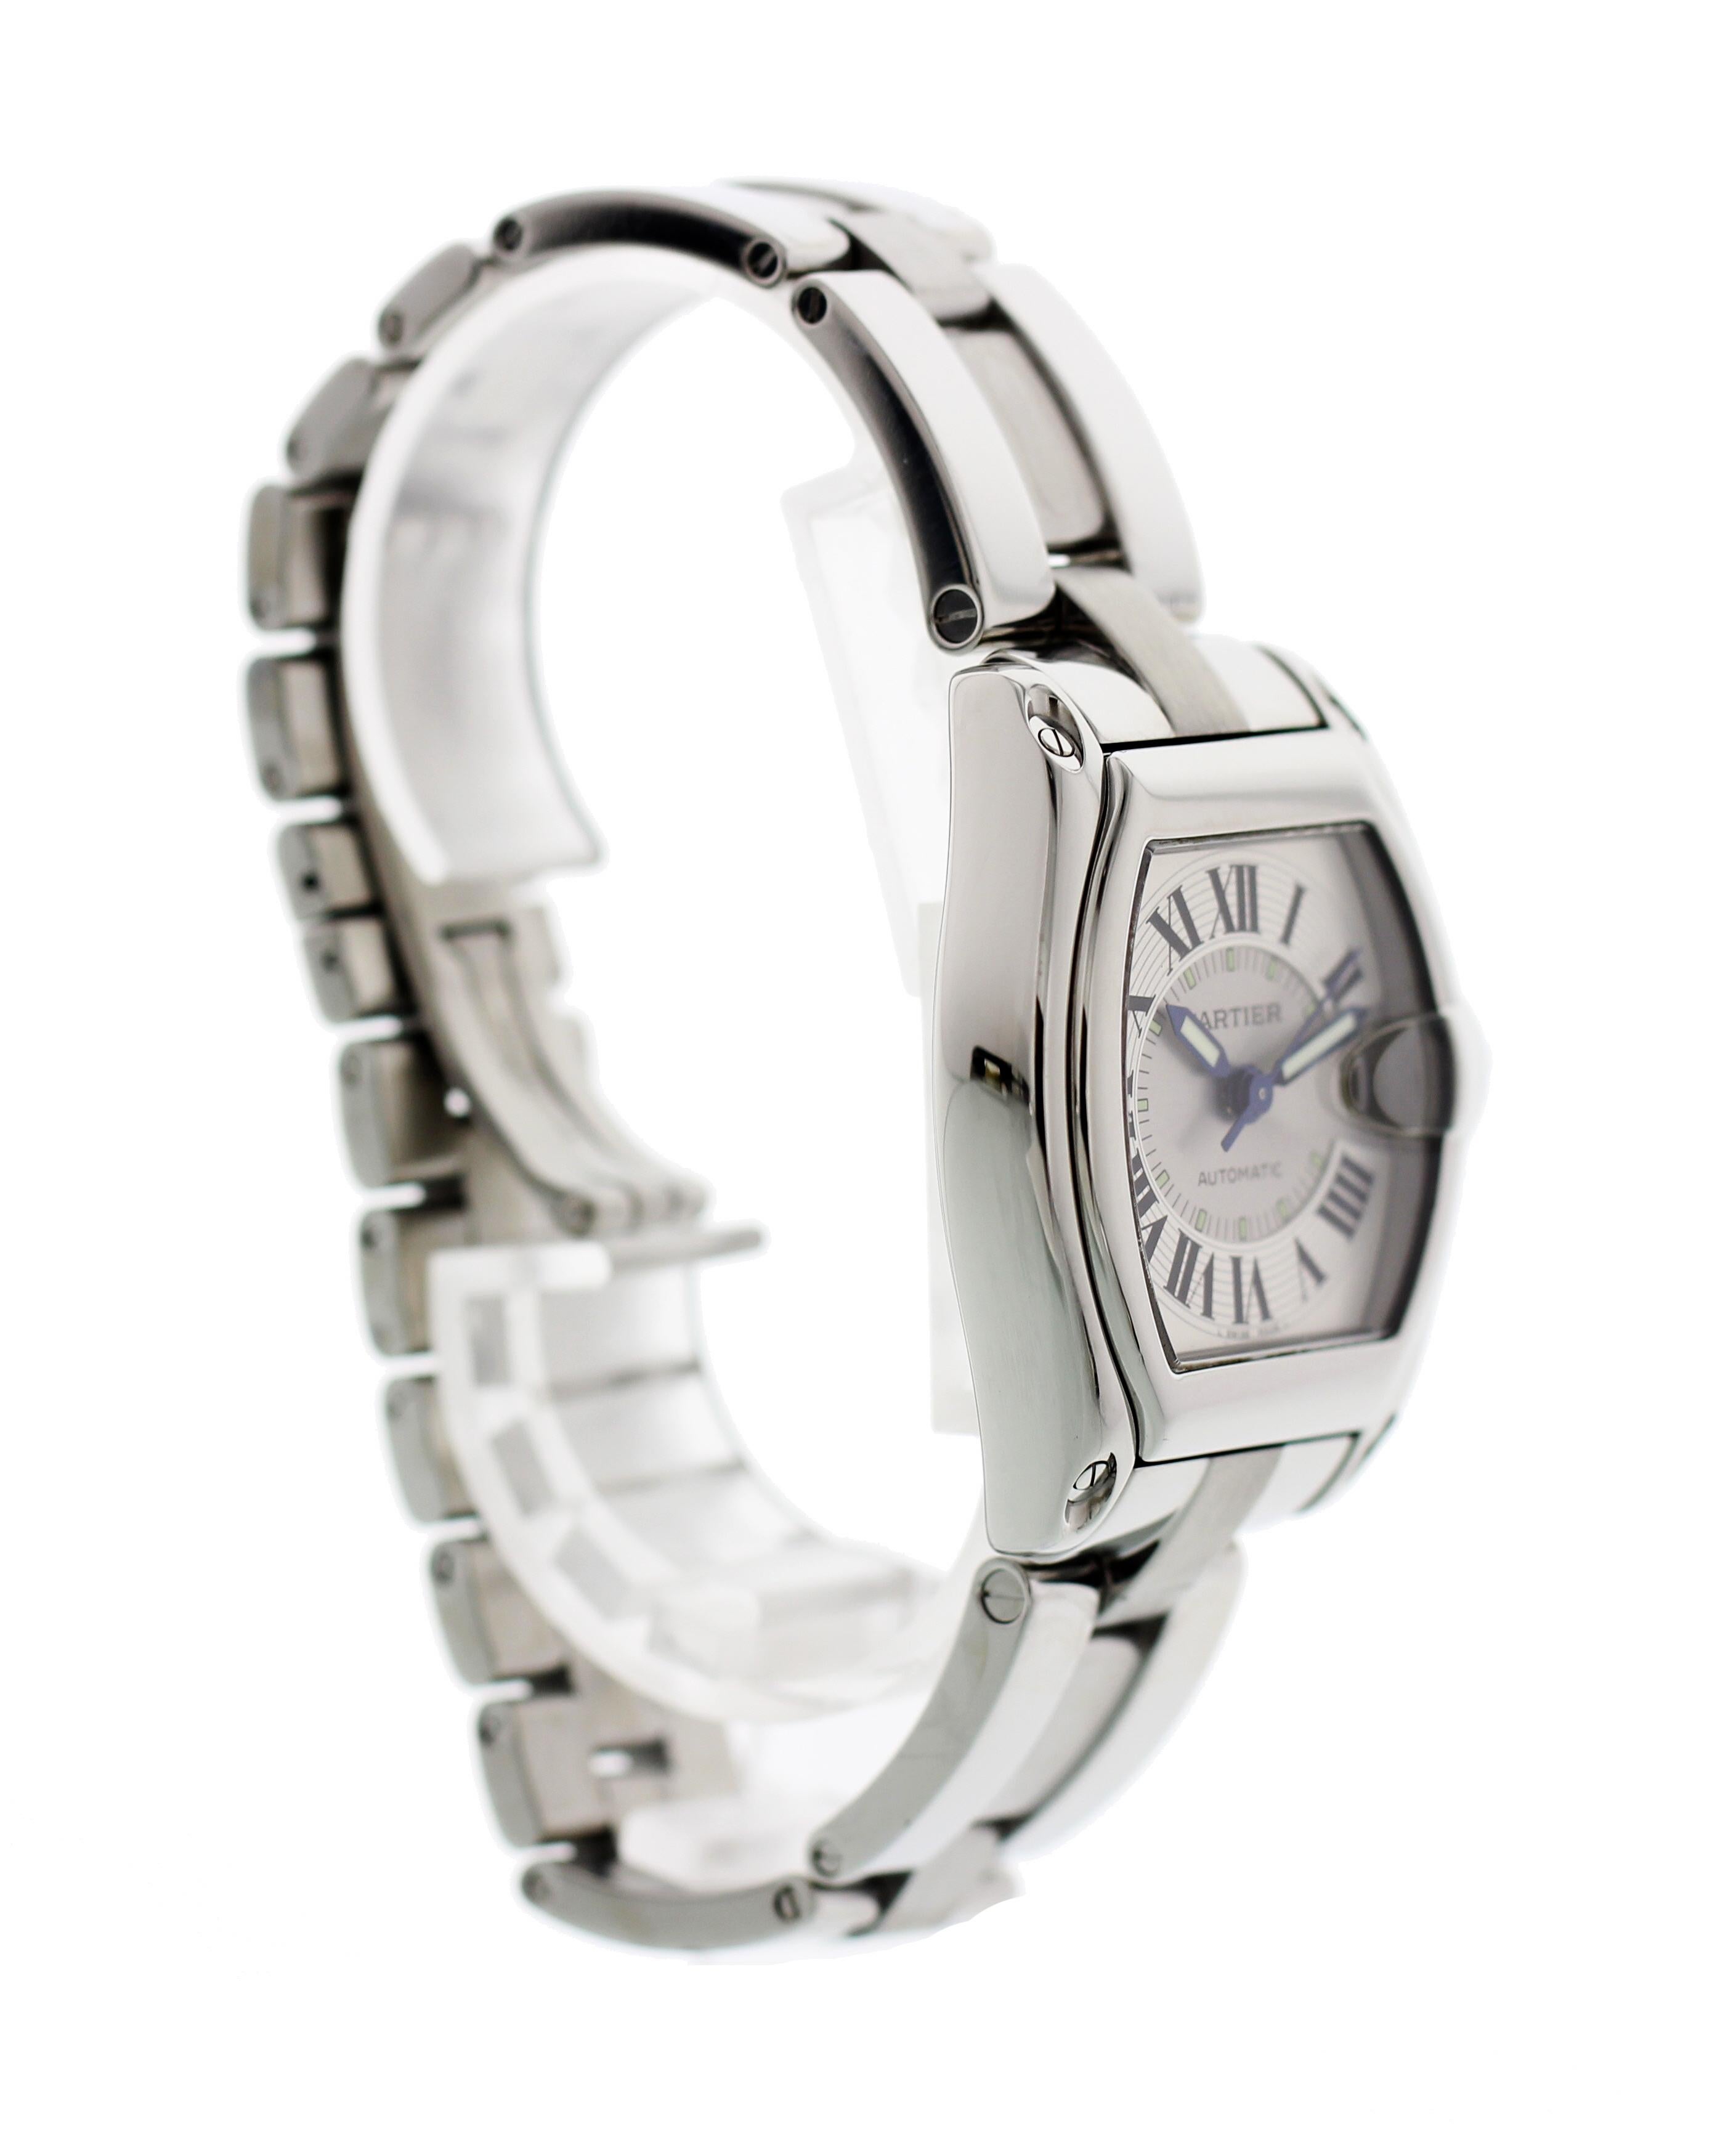 Men's Cartier Roadster 2510. 38 mm stainless steel case. Stainless steel bezel. Silver dial with luminous hands and markers. Black Roman numerals. Date display at 3 o'clock. Stainless steel band with hidden double folding clasp. Will comfortably fit